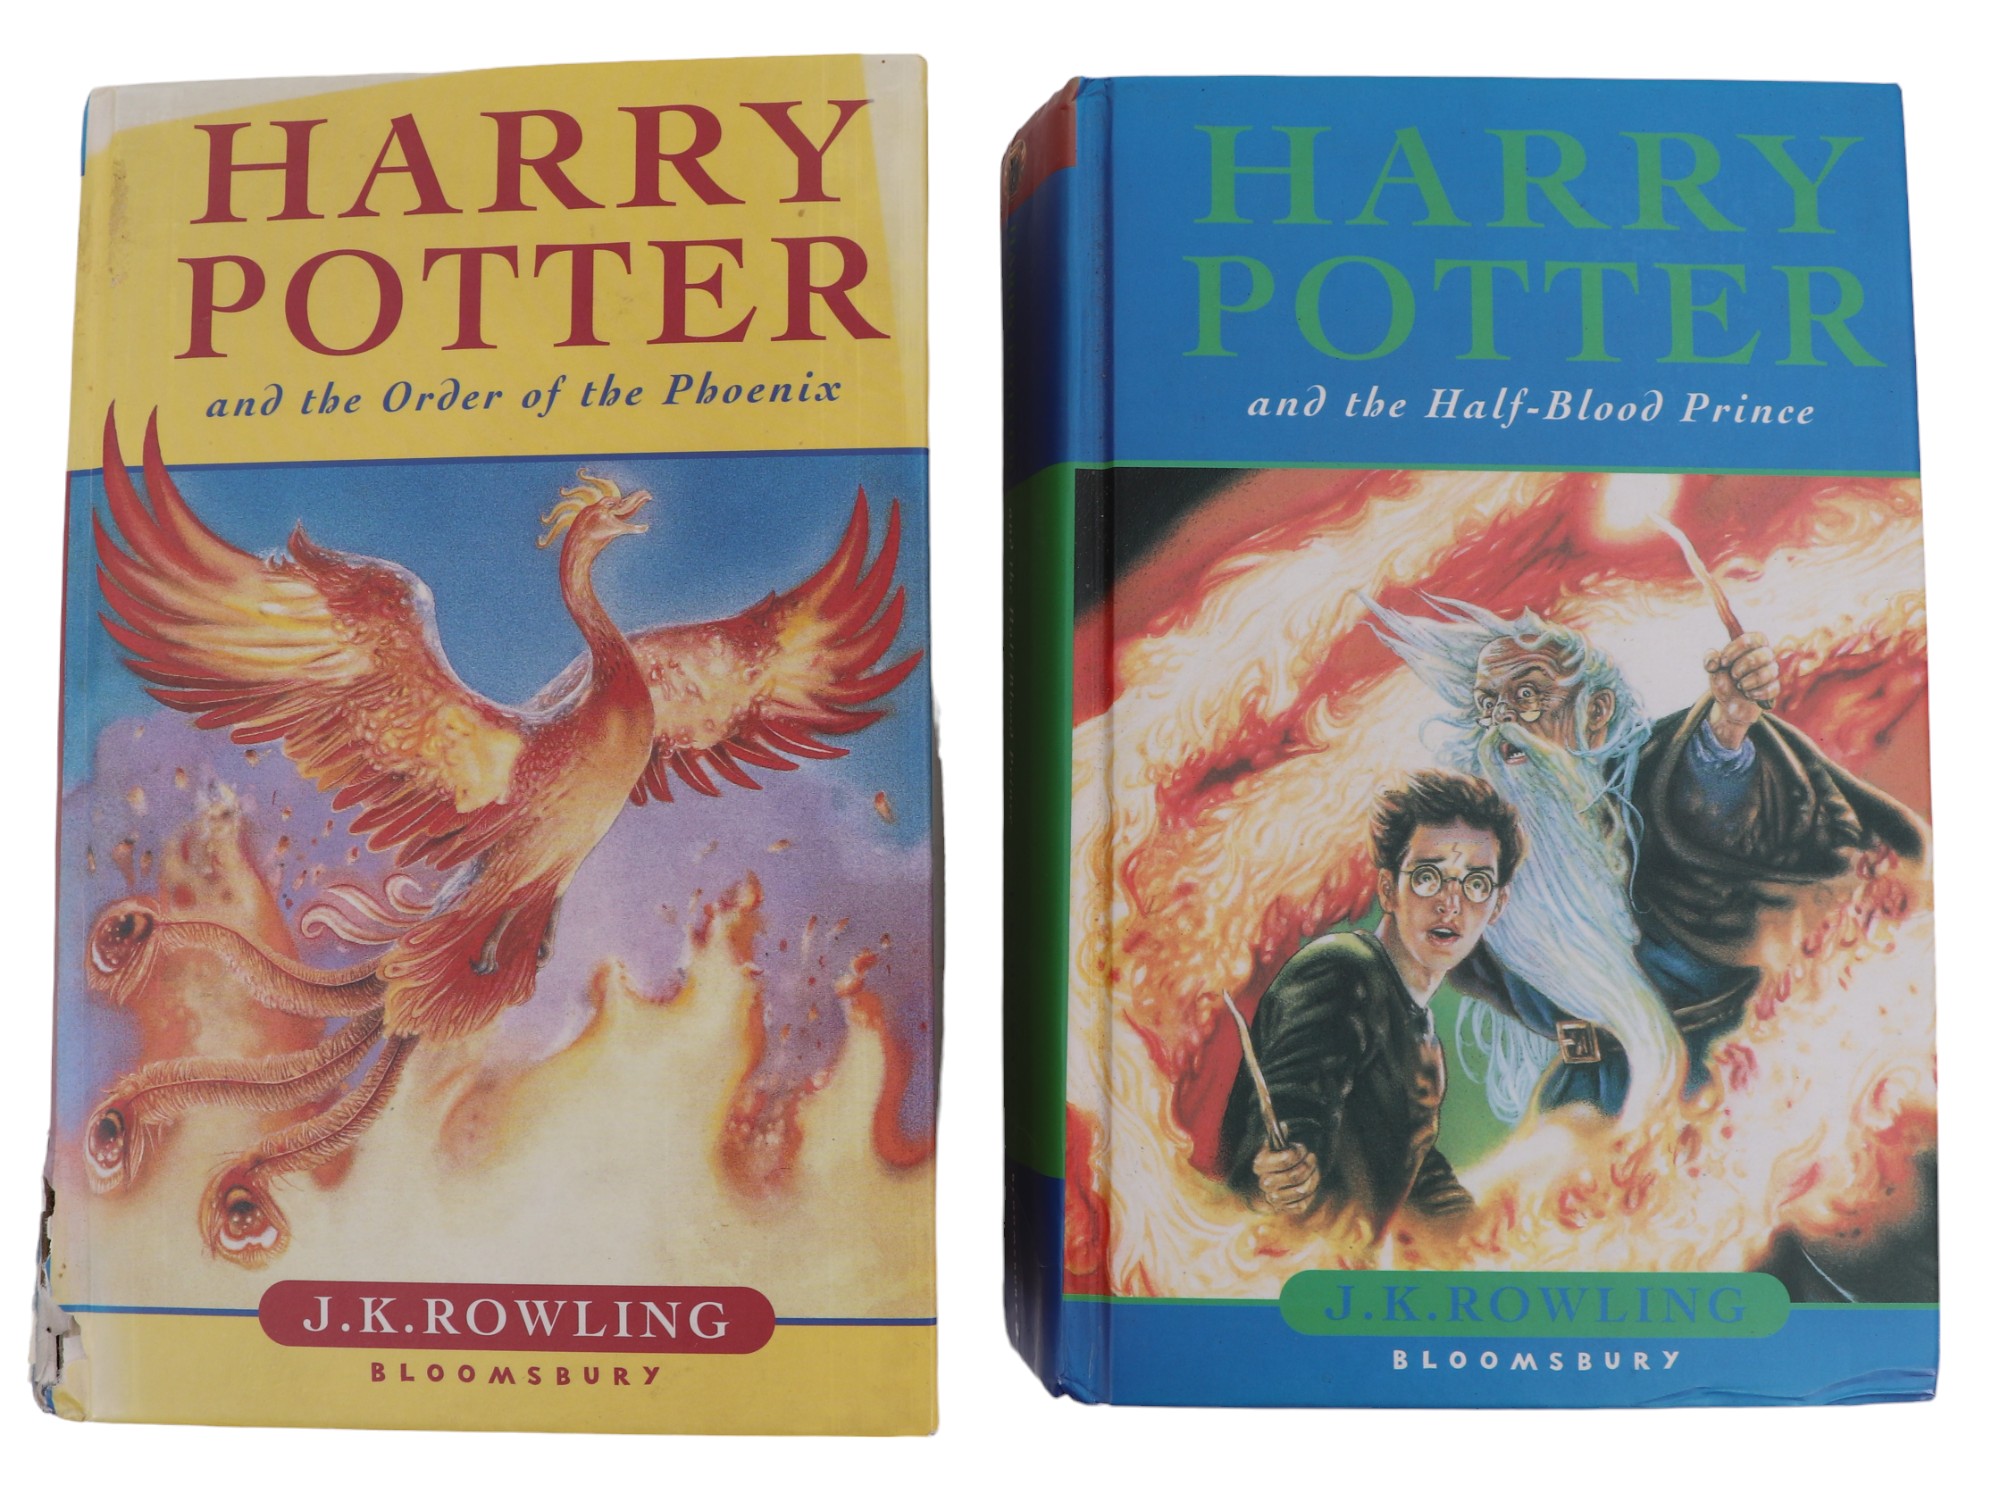 J K Rowling, "Harry Potter and the Order of the Phoenix" and "Harry Potter and the Half-Blood - Image 2 of 2